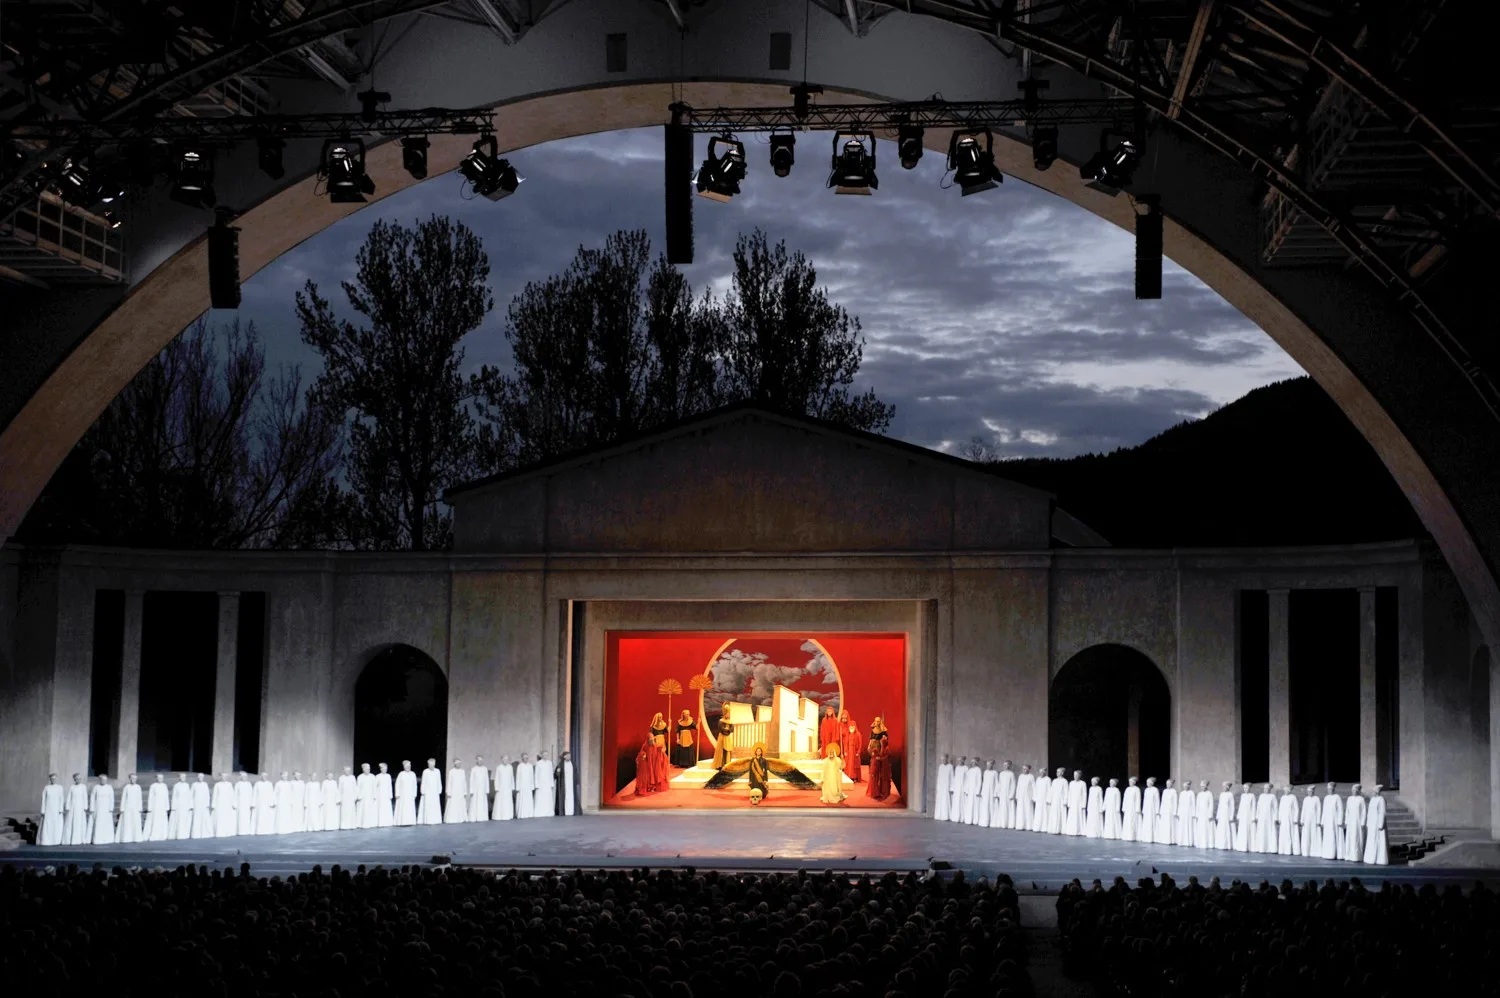 Passion Play Theatre night time Photos: Oberammergau Passion Play 2020